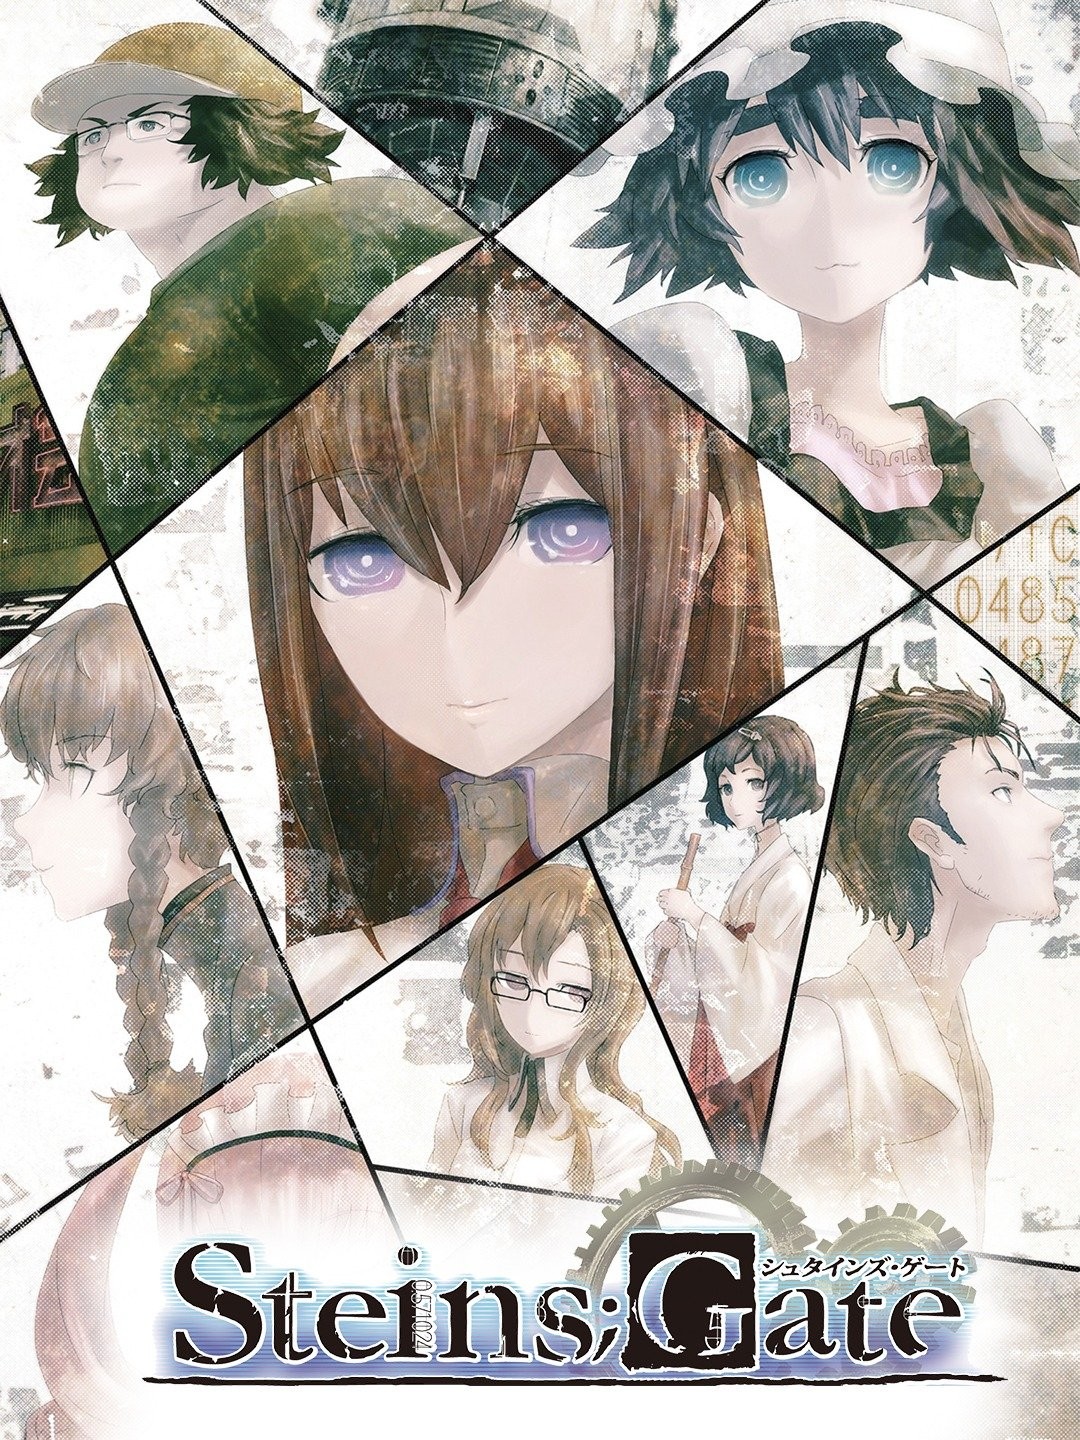 The New Gate Anime Adaptation Is Confirmed-demhanvico.com.vn